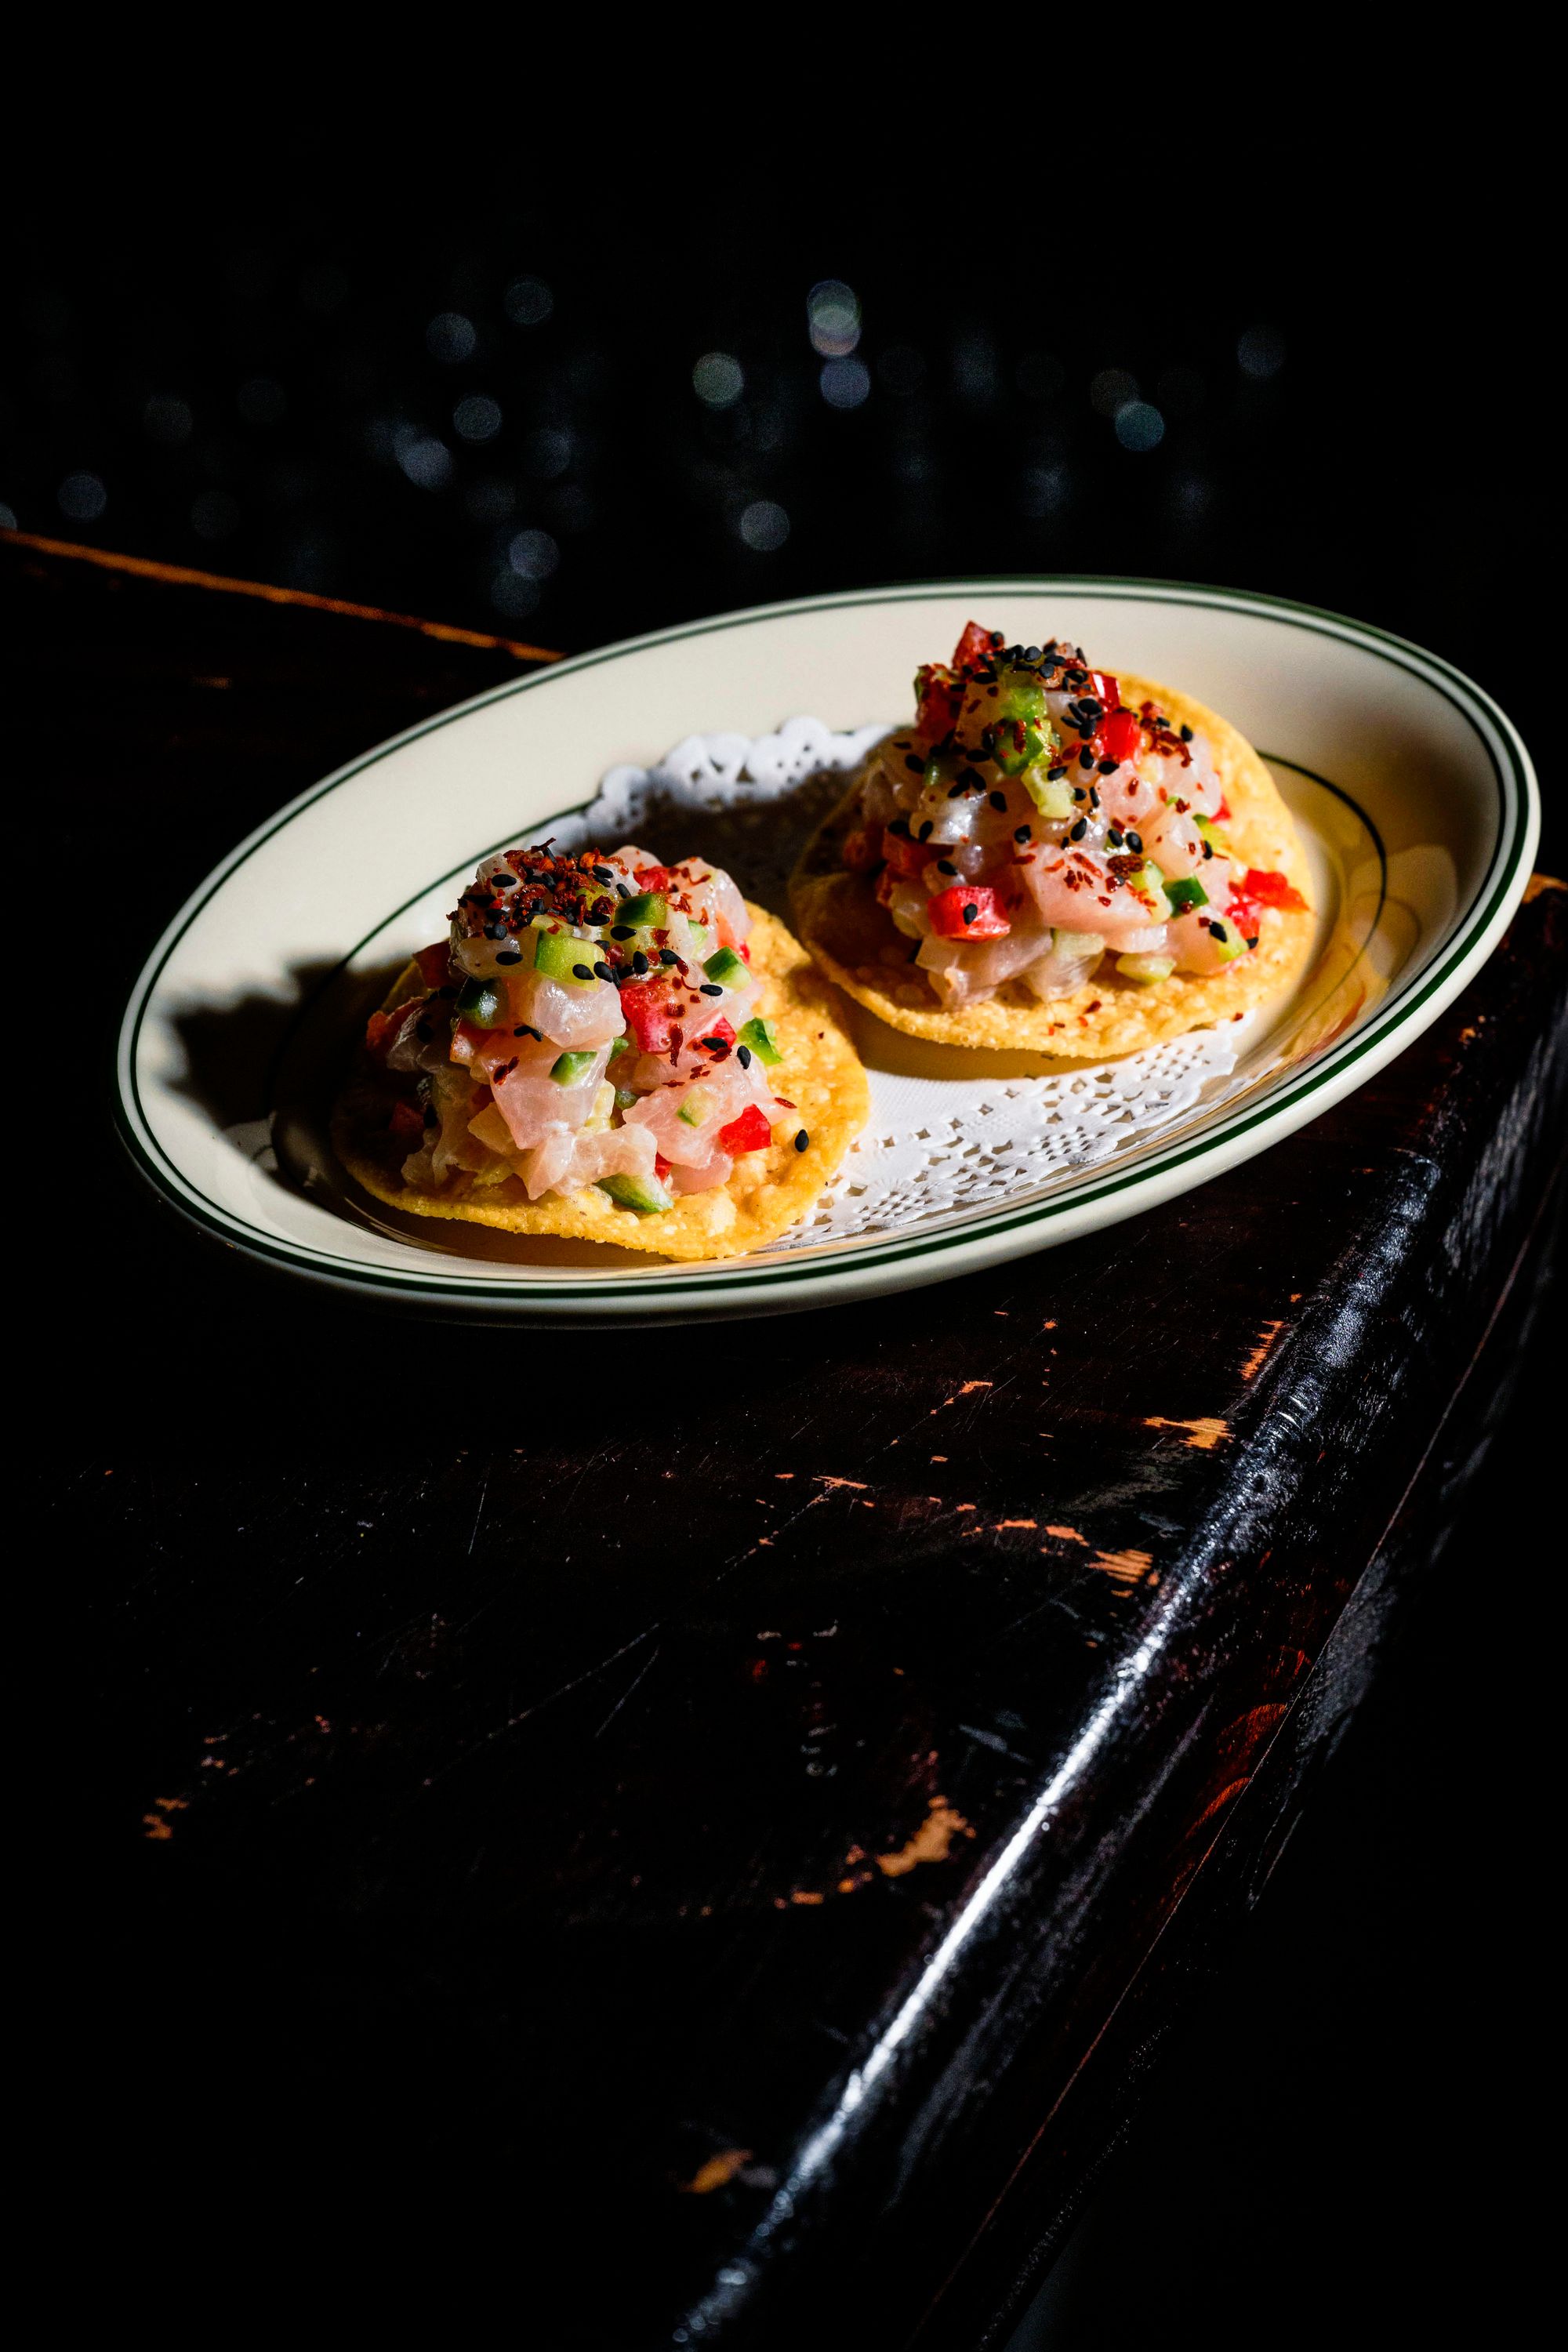 The ceviche-like tostadas at Old Love's. Photo: Supplied